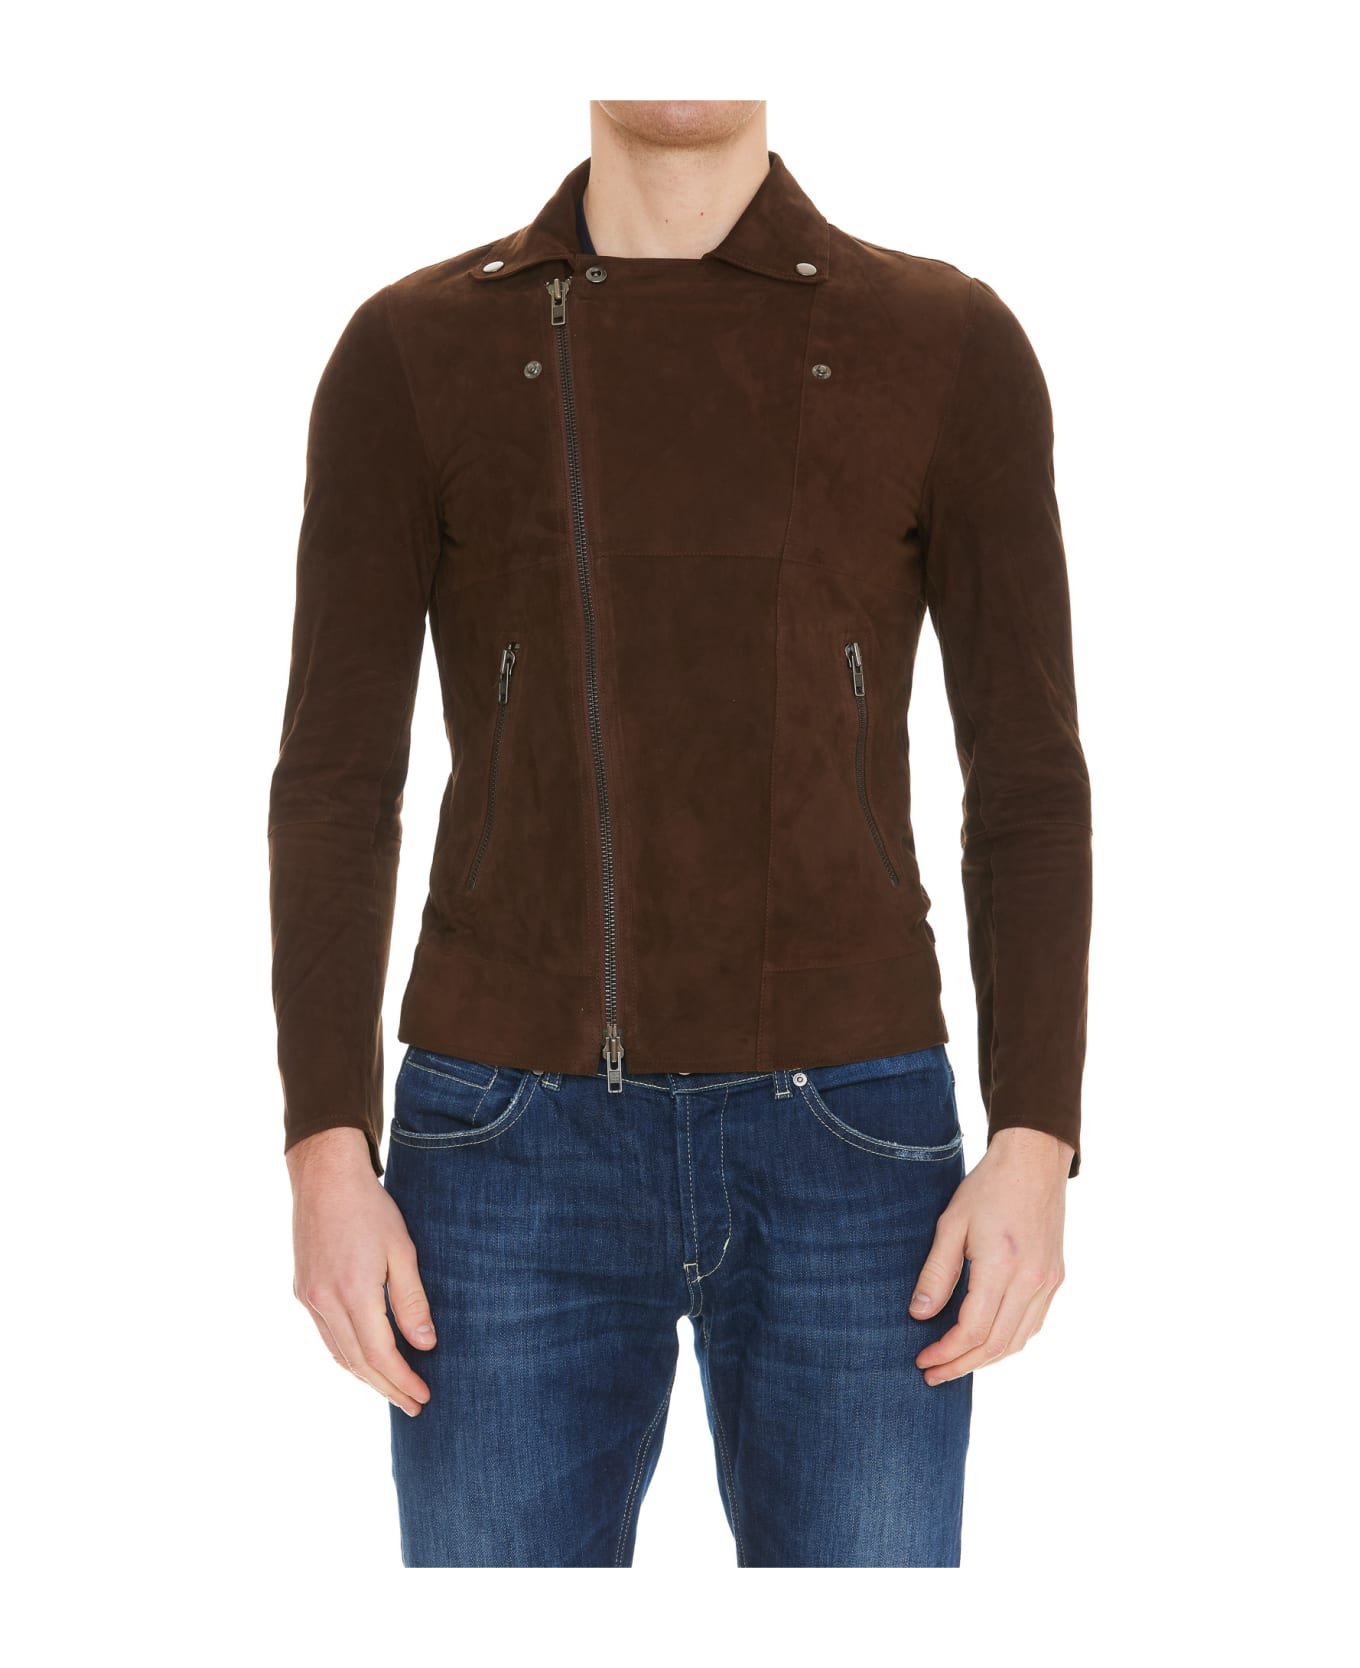 Bully Suede Leather Jacket - BROWN